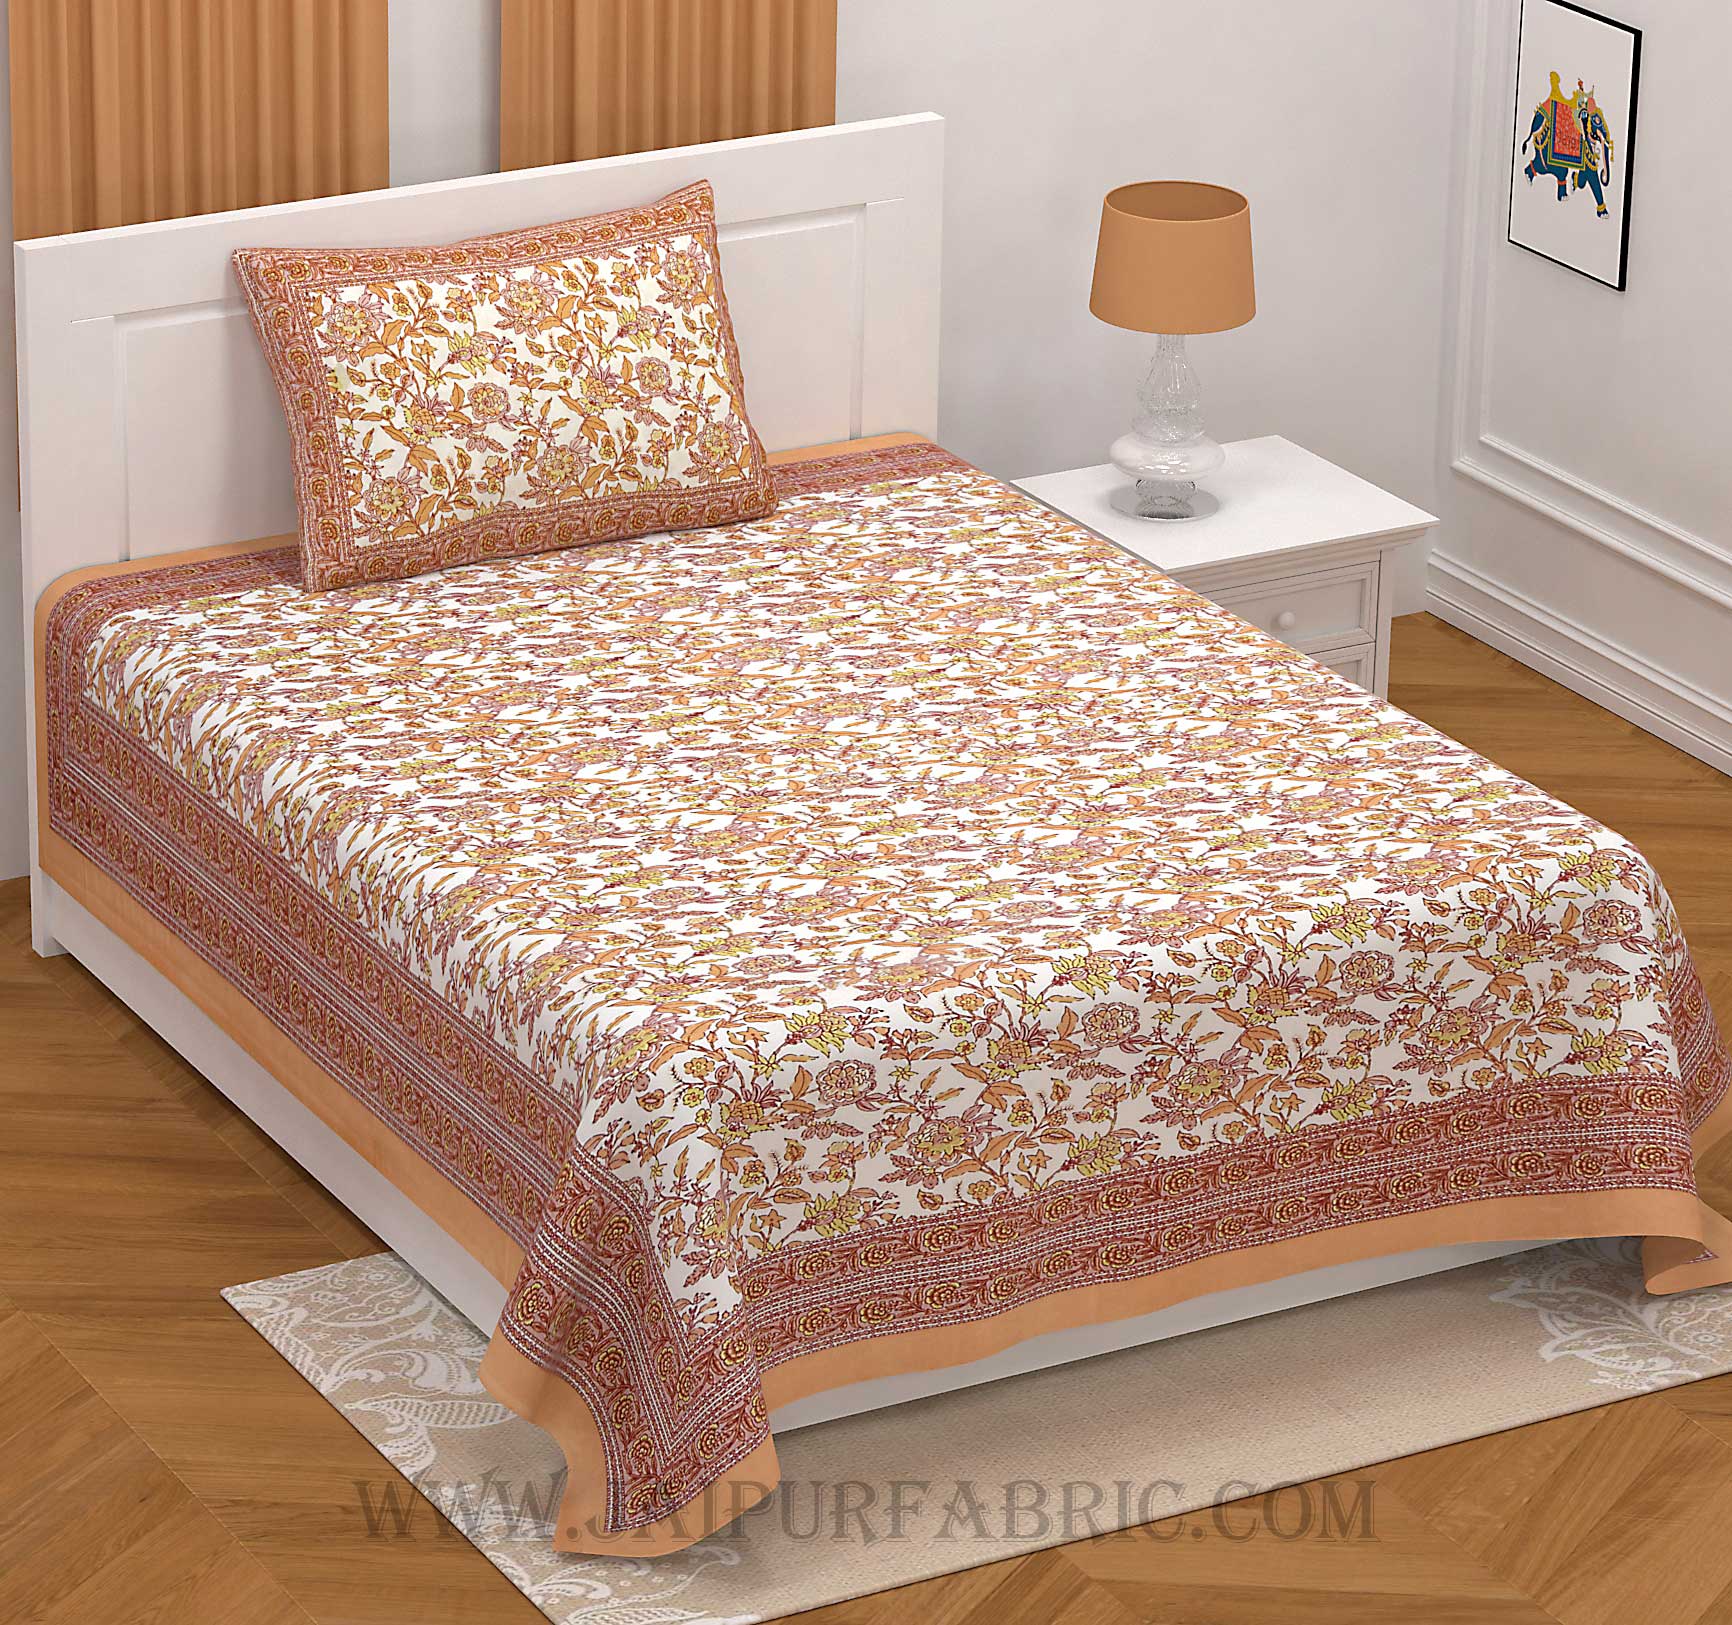 COMBO367 Beautiful Peach Ethnic Combo Set of 1 Single and 1 Double Bedsheet With 3 Pillow Cover